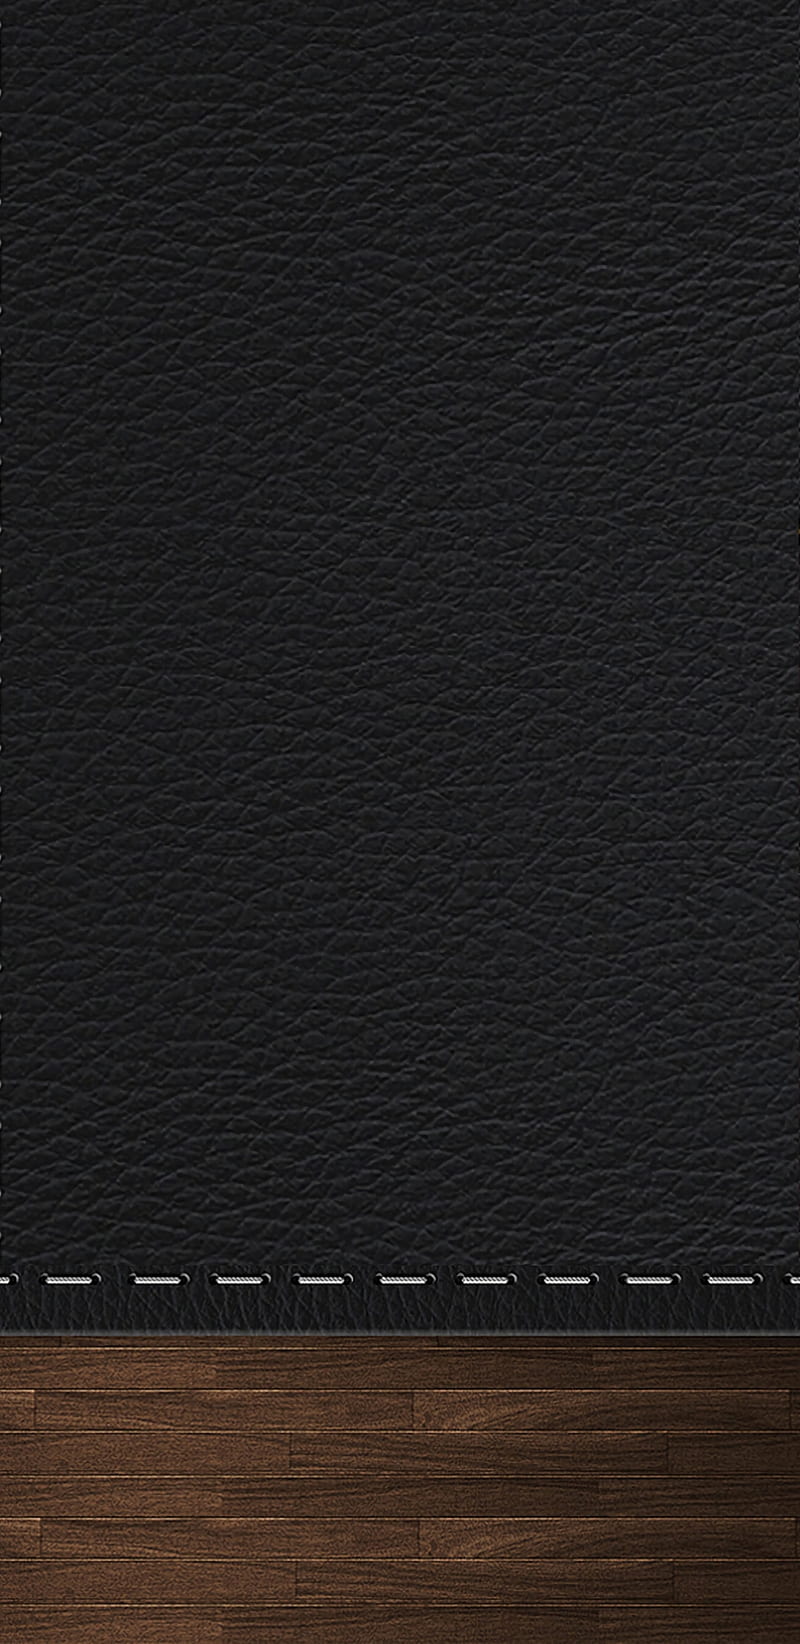 Leather and Wood, stitch, galaxy s9 black, HD phone wallpaper